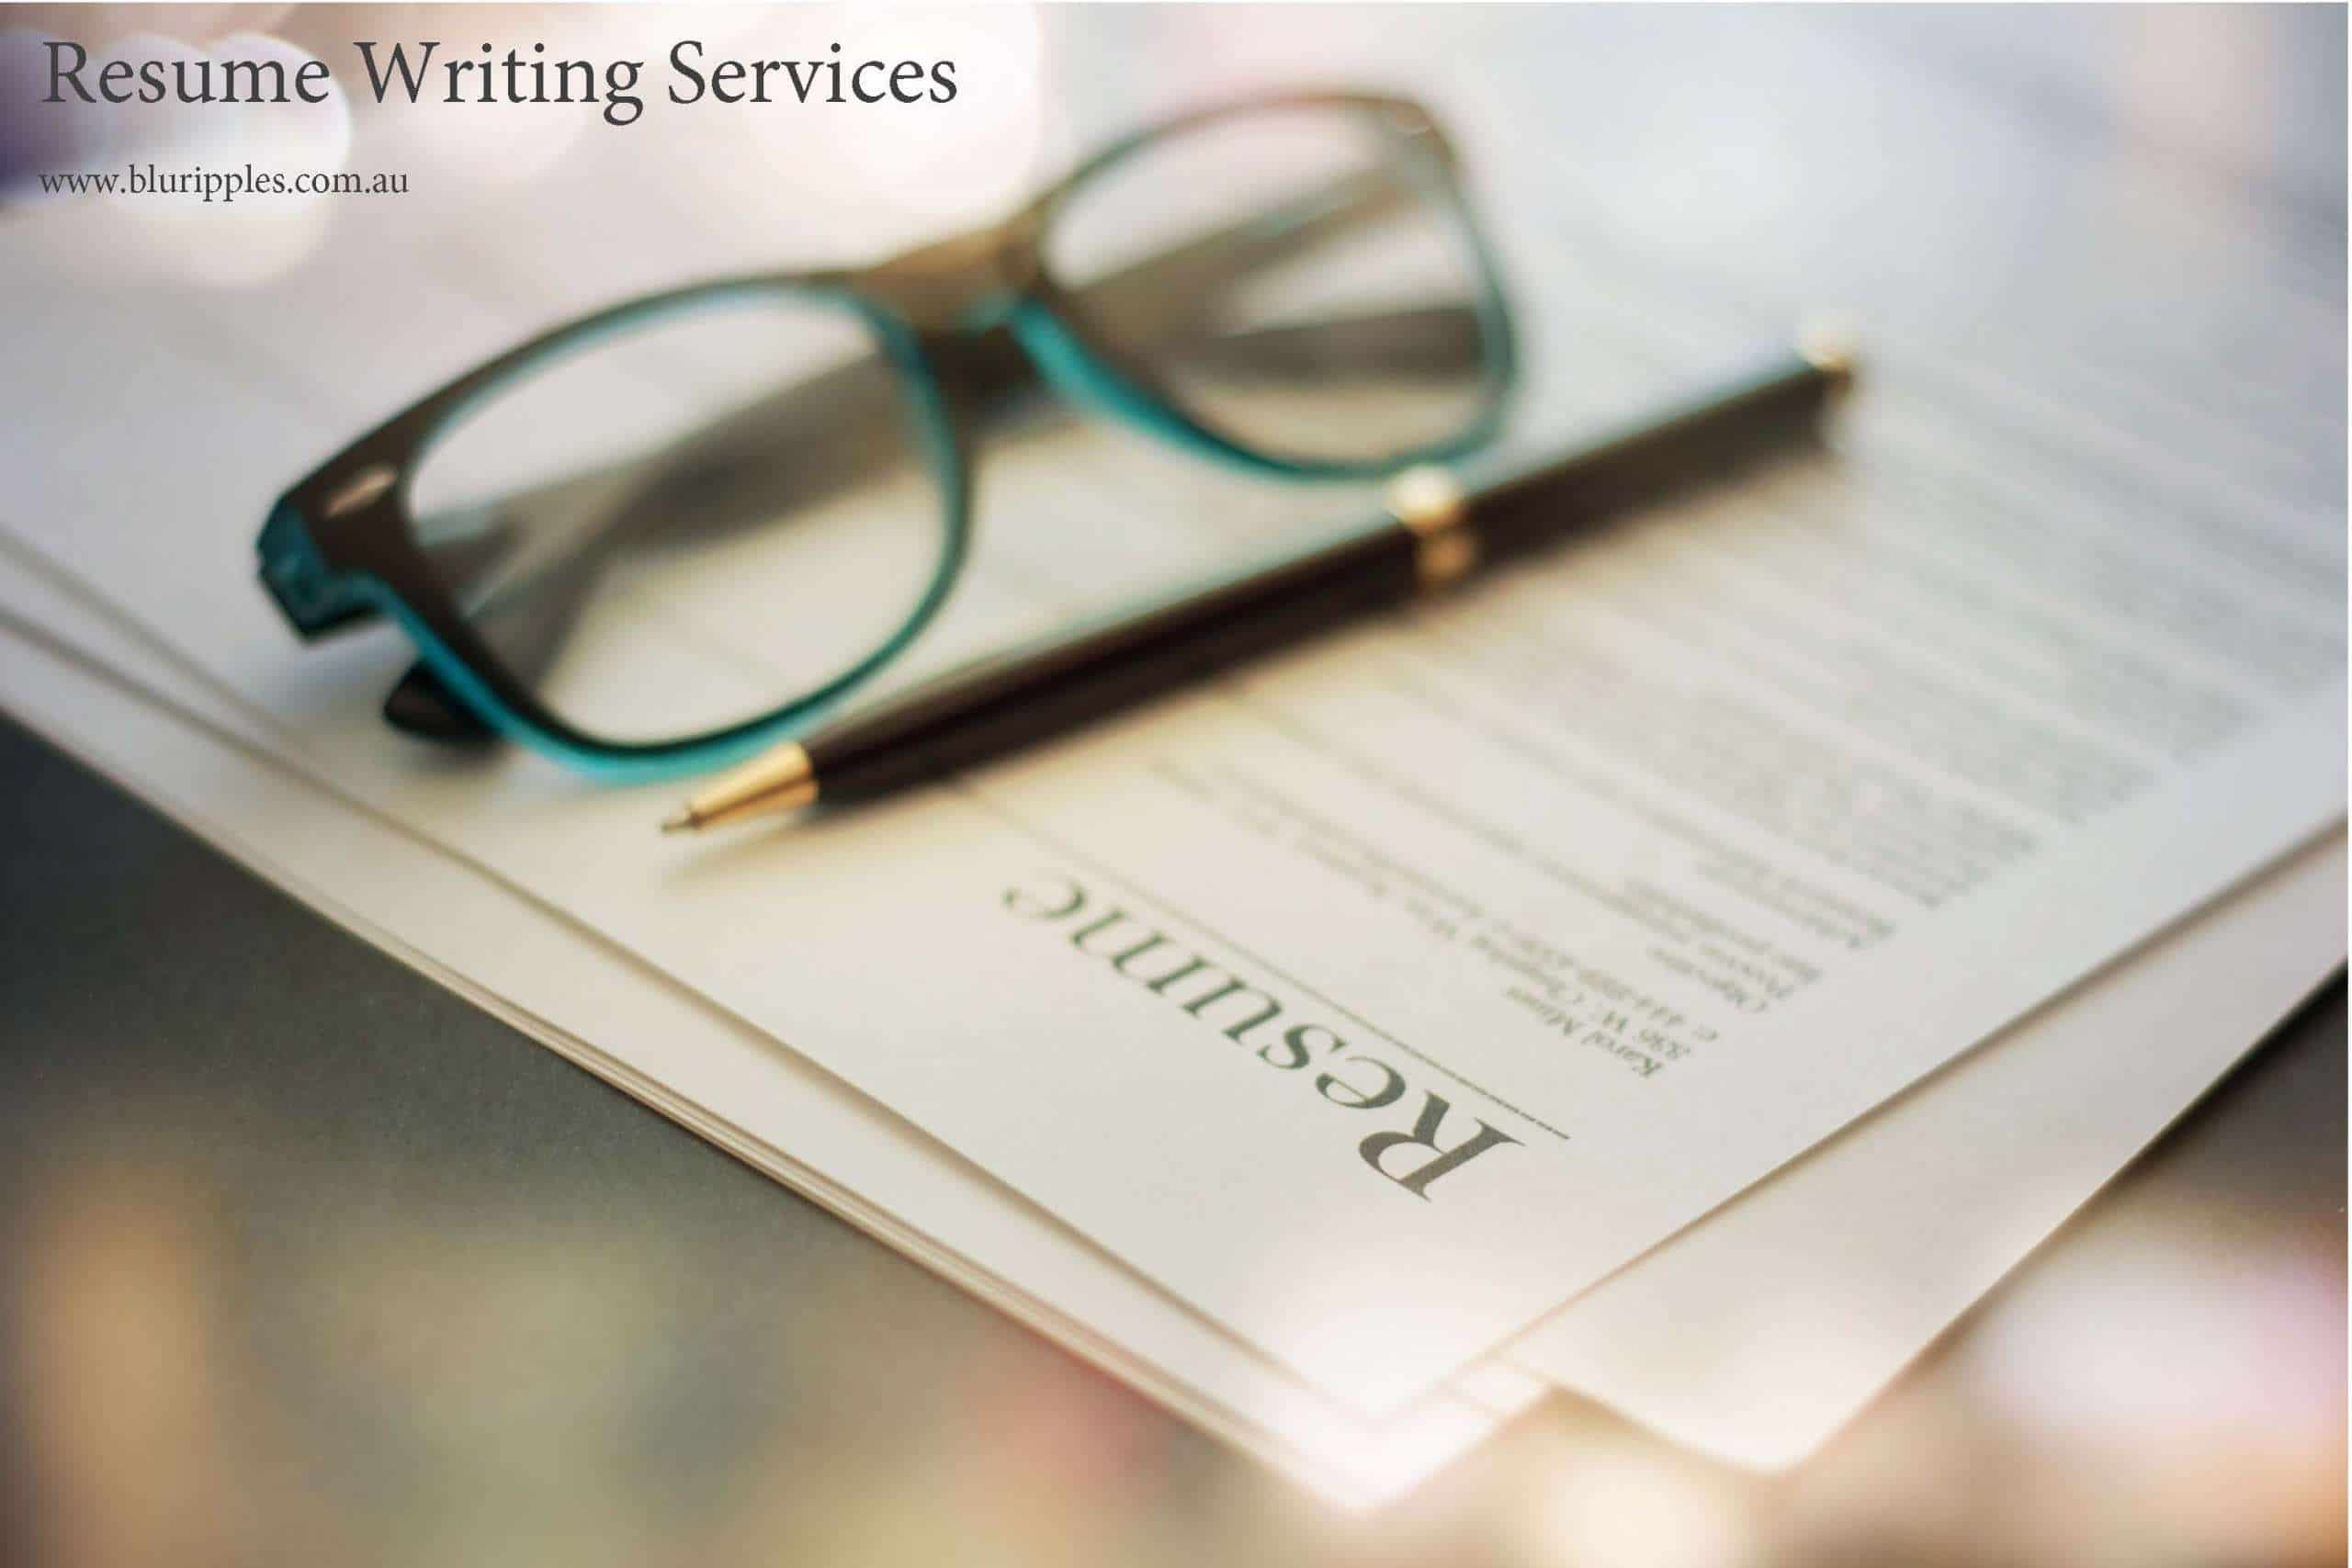 Blu Ripples Resume Writing Services